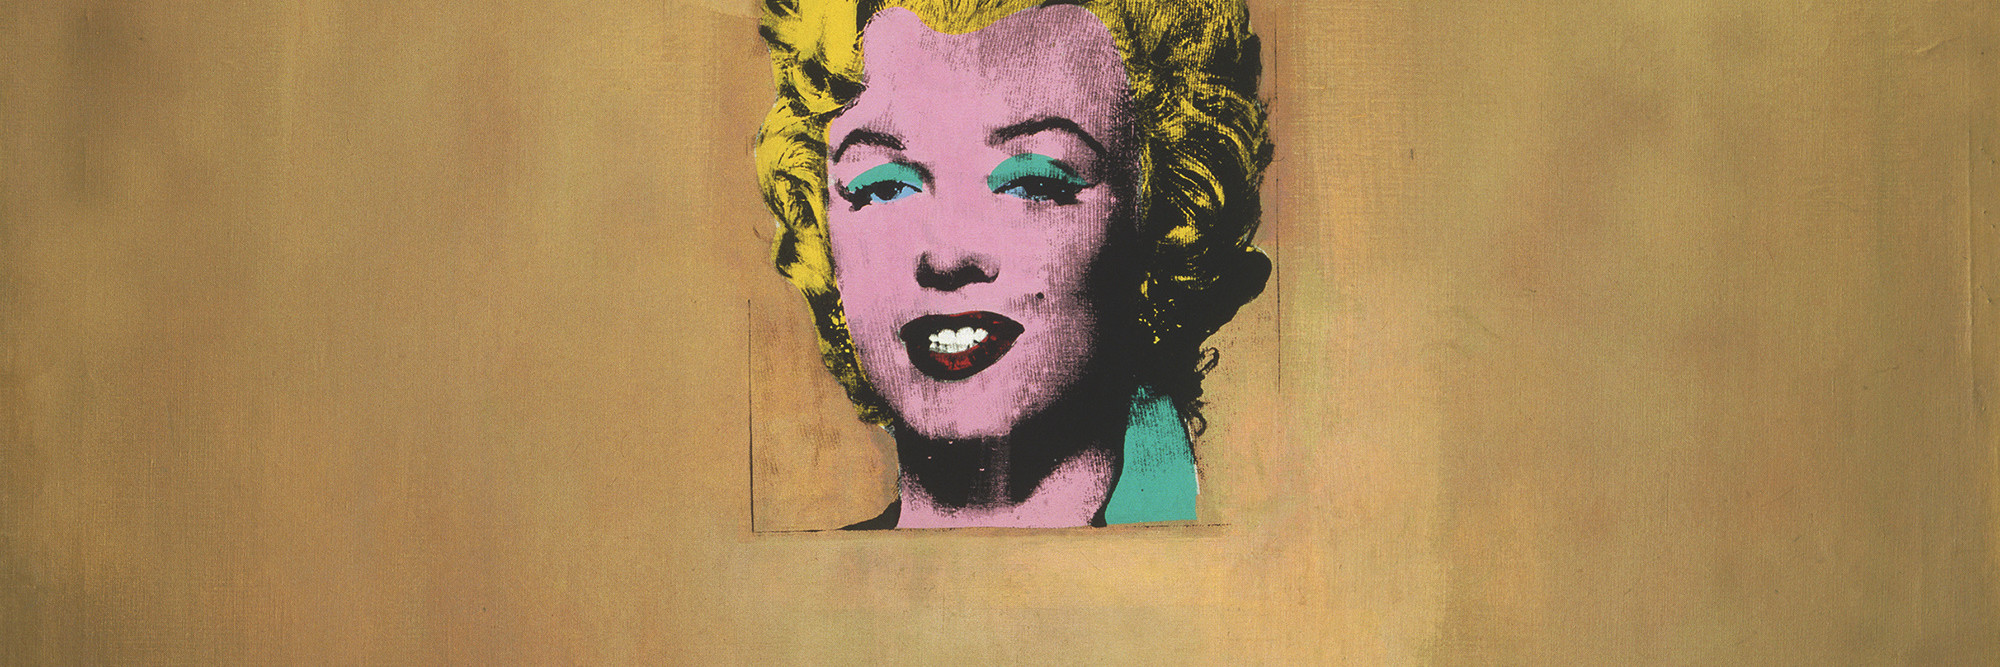 Andy Warhol. Gold Marilyn Monroe. 1962. Silkscreen ink on synthetic polymer paint on canvas, 6&#39; 11 1/4&#34; x 57&#34; (211.4 x 144.7 cm). Gift of Philip Johnson. © 2010 Andy Warhol Foundation for the Visual Arts / Artists Rights Society (ARS), New York